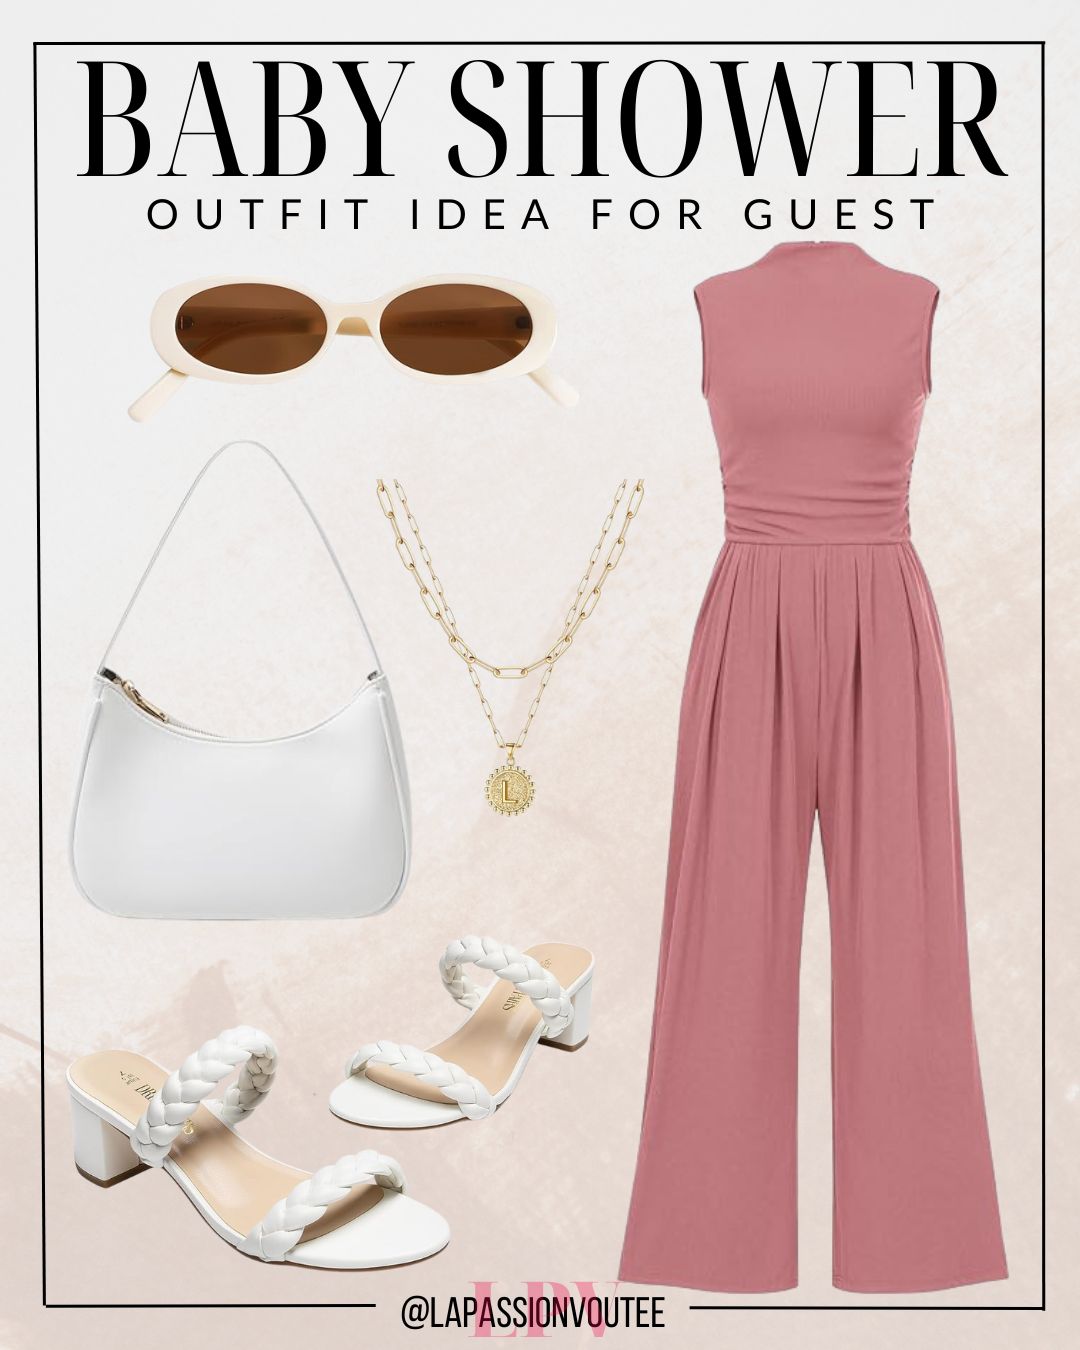 10 Stunning Baby Shower Outfits for Guests